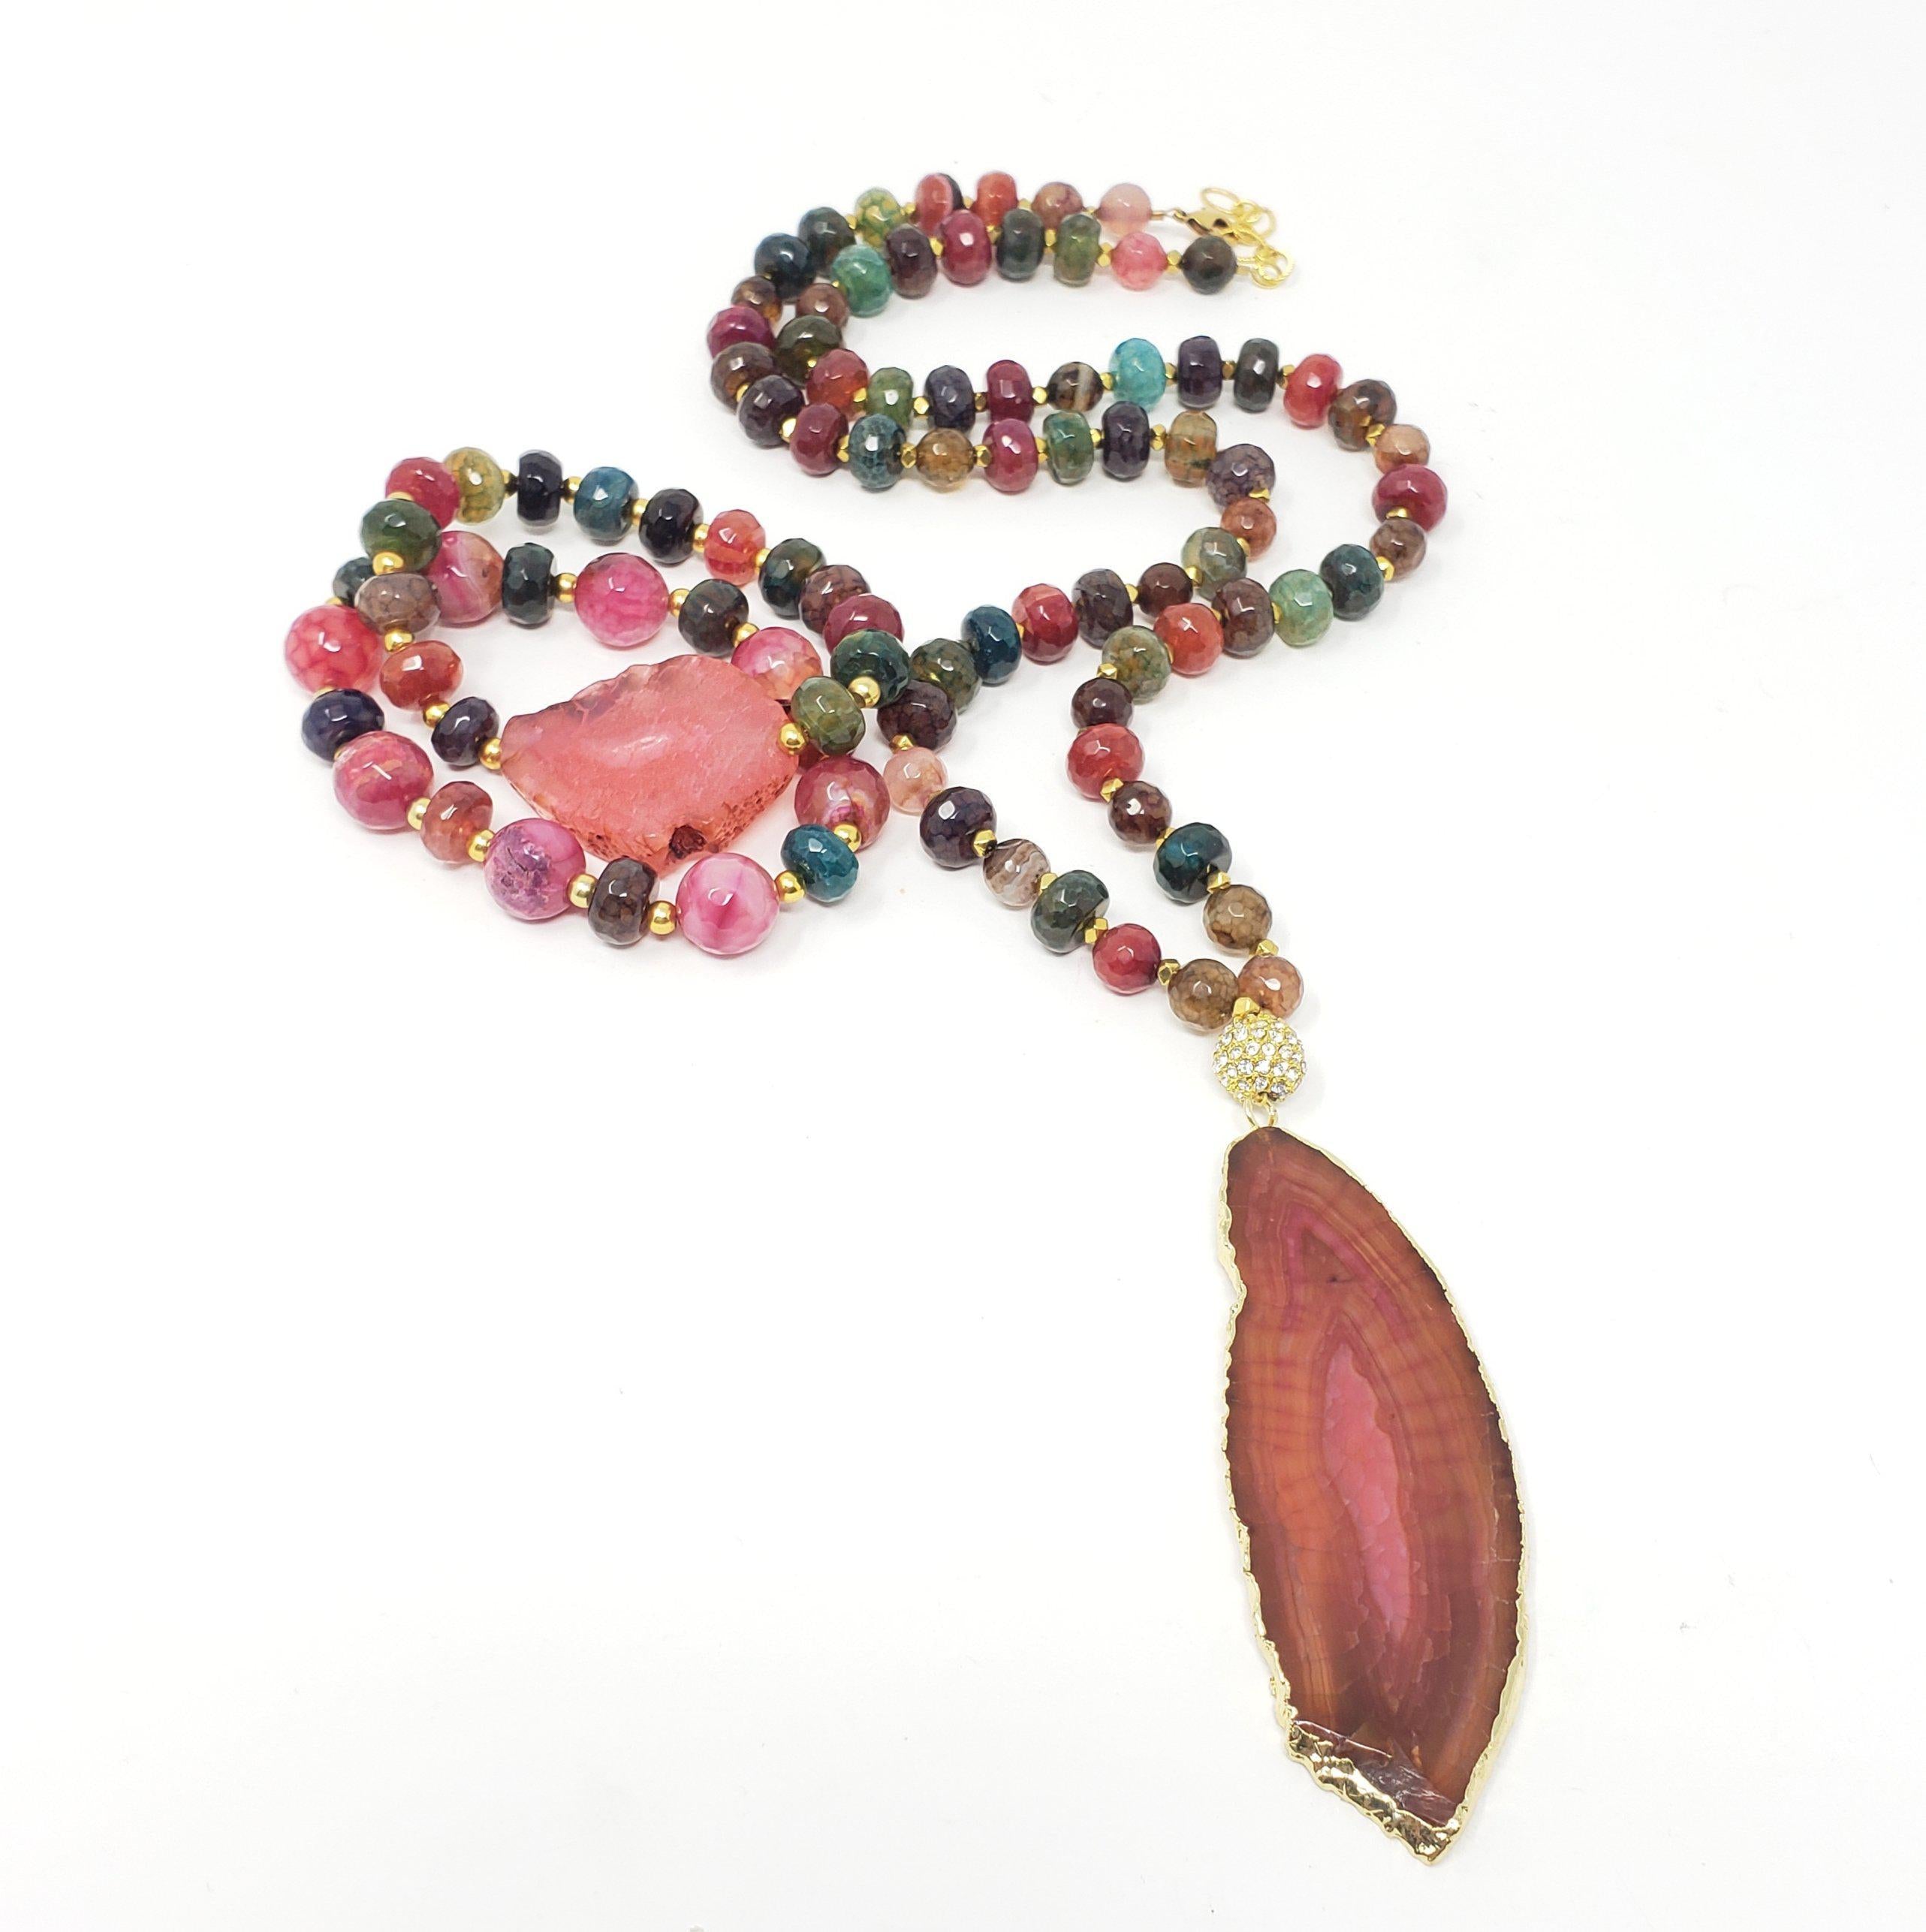 Multicolored Agate Necklace and Bracelets